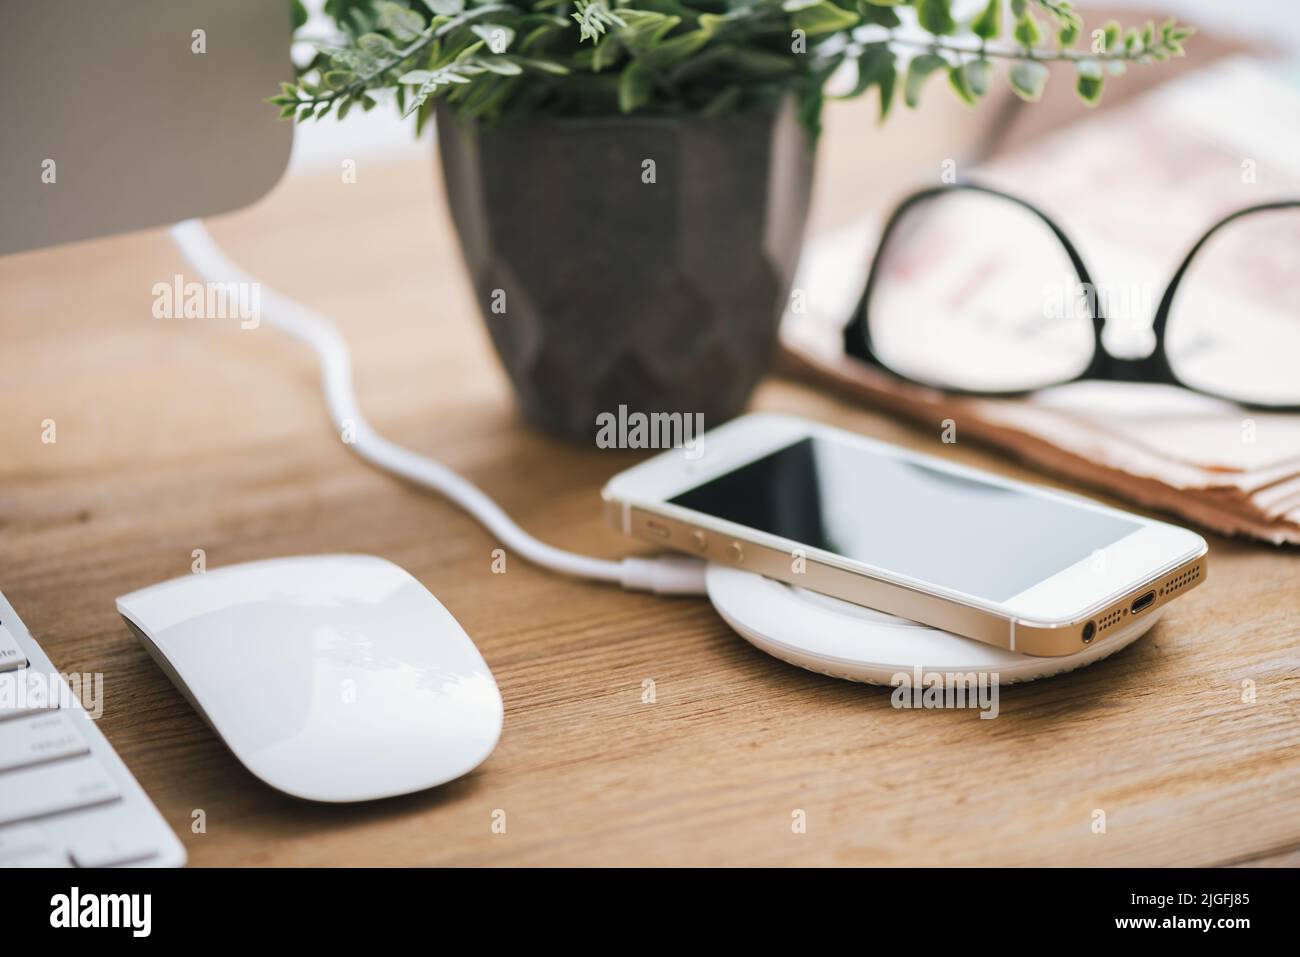 Charging the smartphone with wireless charger on desktop. Stock Photo